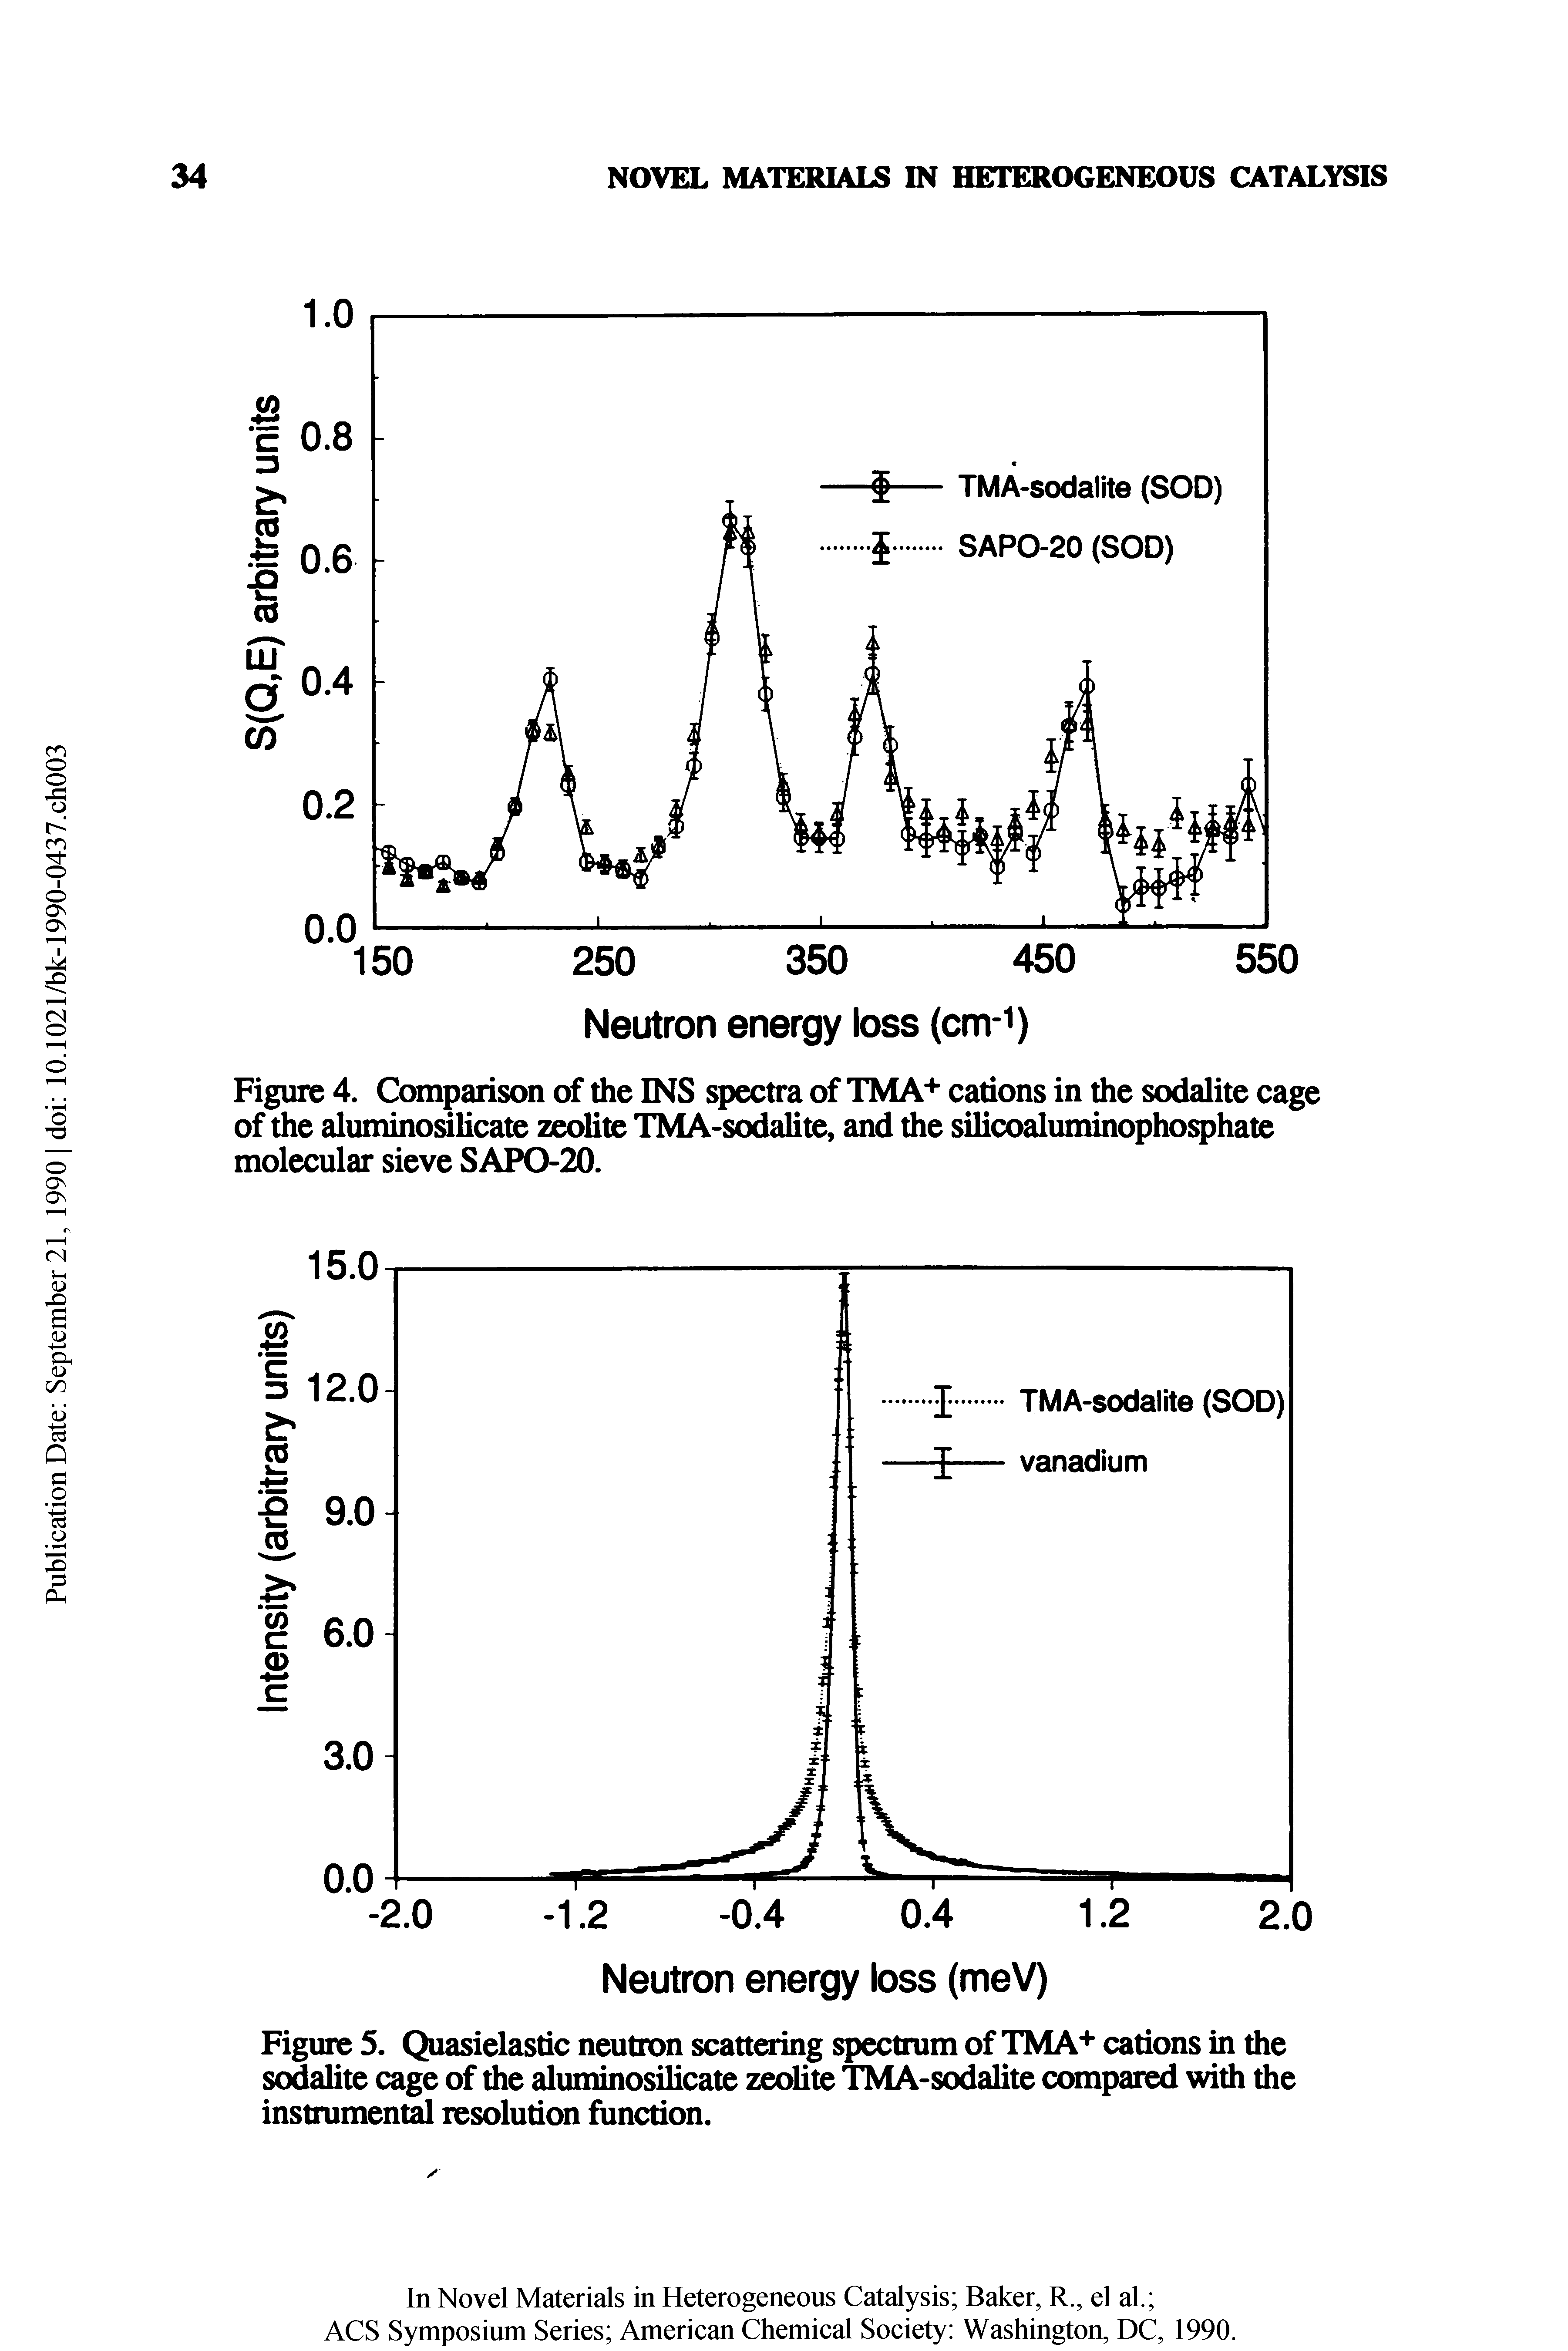 Figure 5. Quasielastic neutron scattering spectrum of TMA+ cations in the sodalite cage of die aluminosilicate zeolite TMA-sodalite compared with the instrument resolution function.